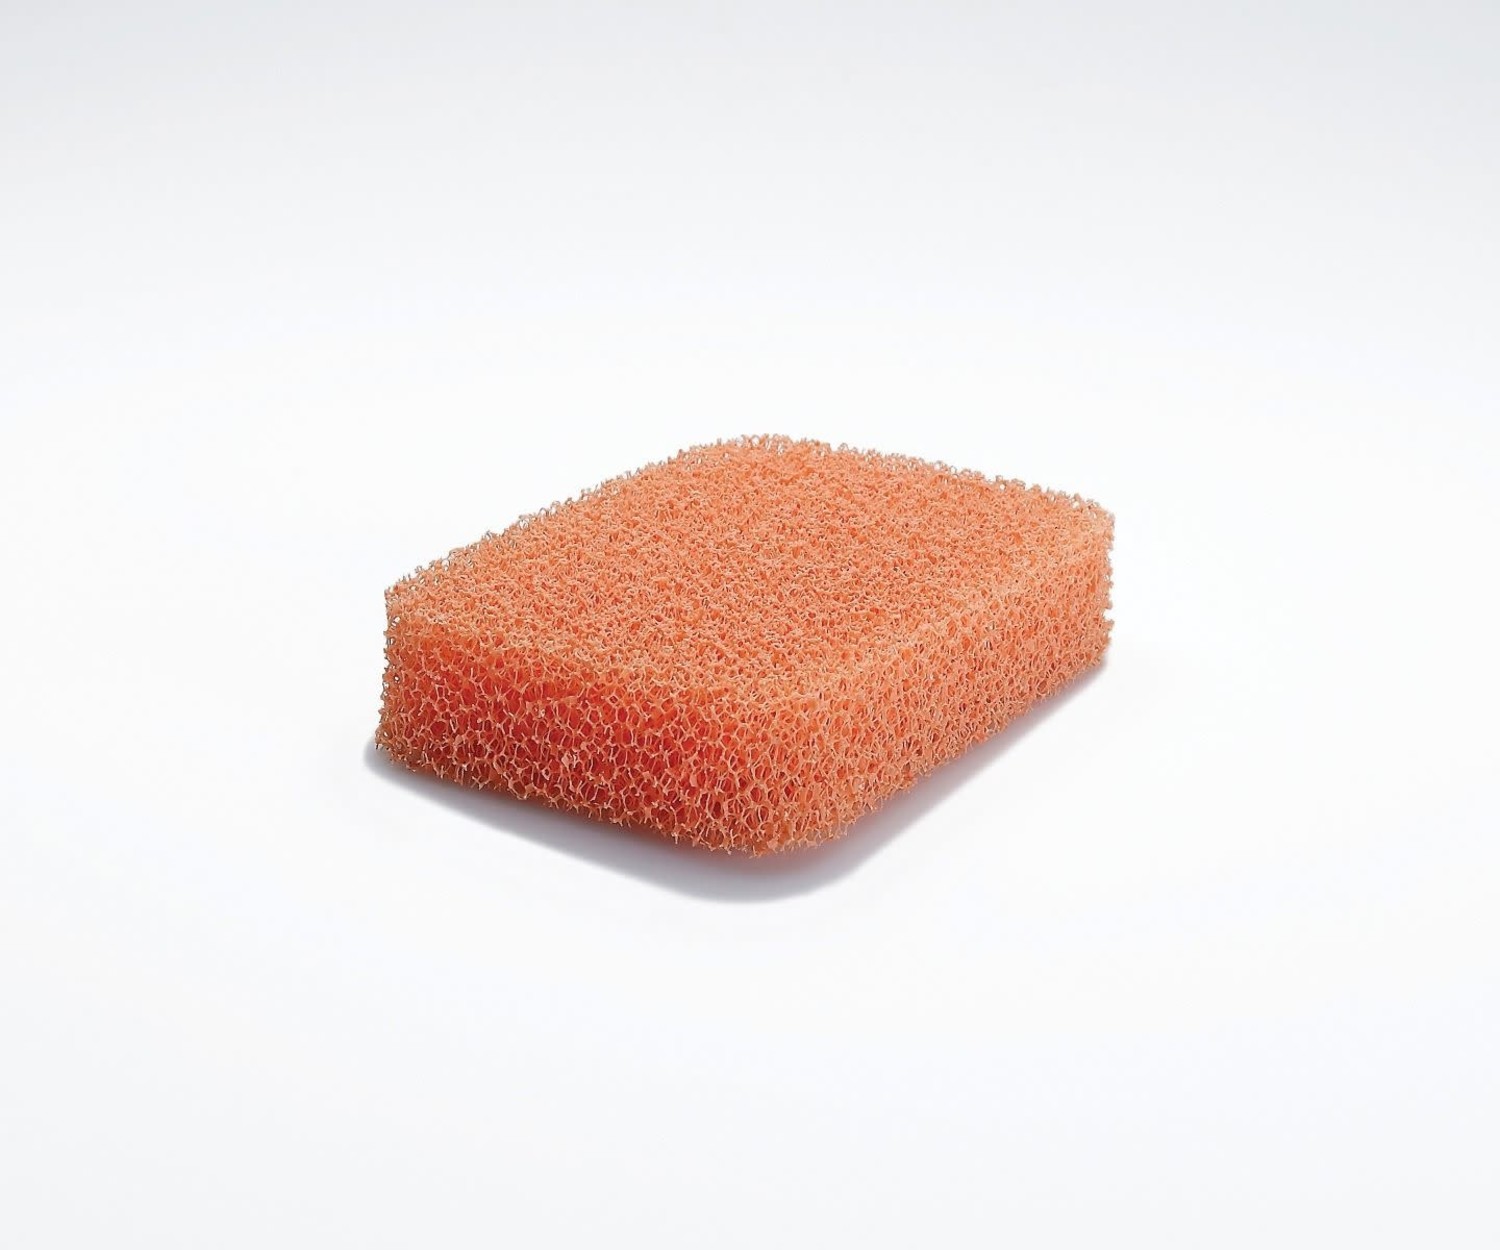 Peachy Clean Antimicrobial Silver Infused Silicone Dish Sponge, Lemongrass